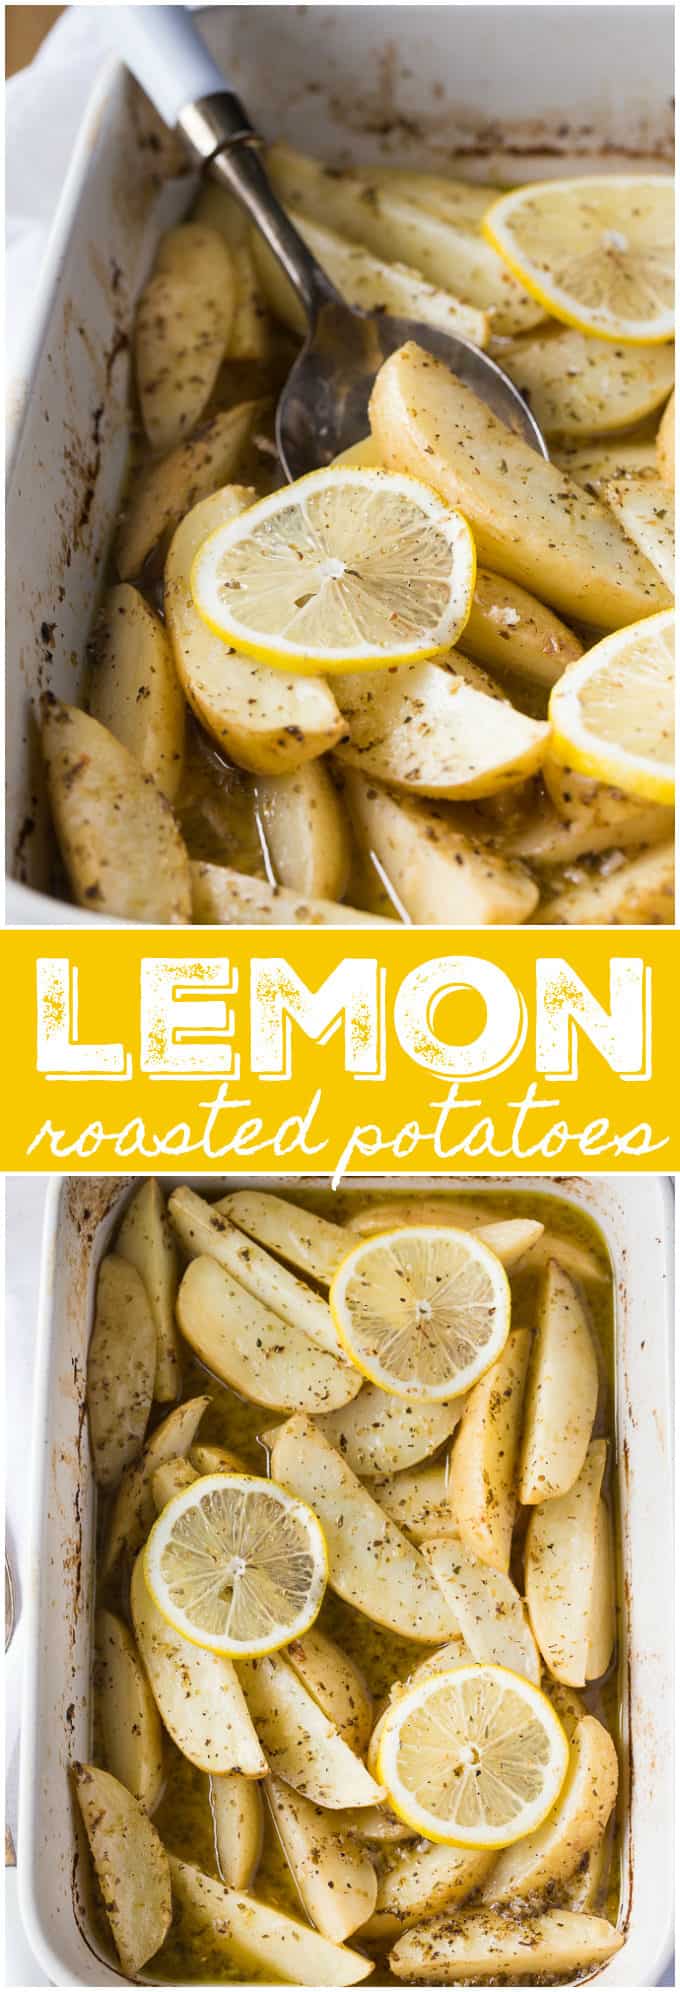 Lemon Roasted Potatoes - The most incredible potato recipe! This side dish is quick to prepare and comes out of the oven full of lemony deliciousness.